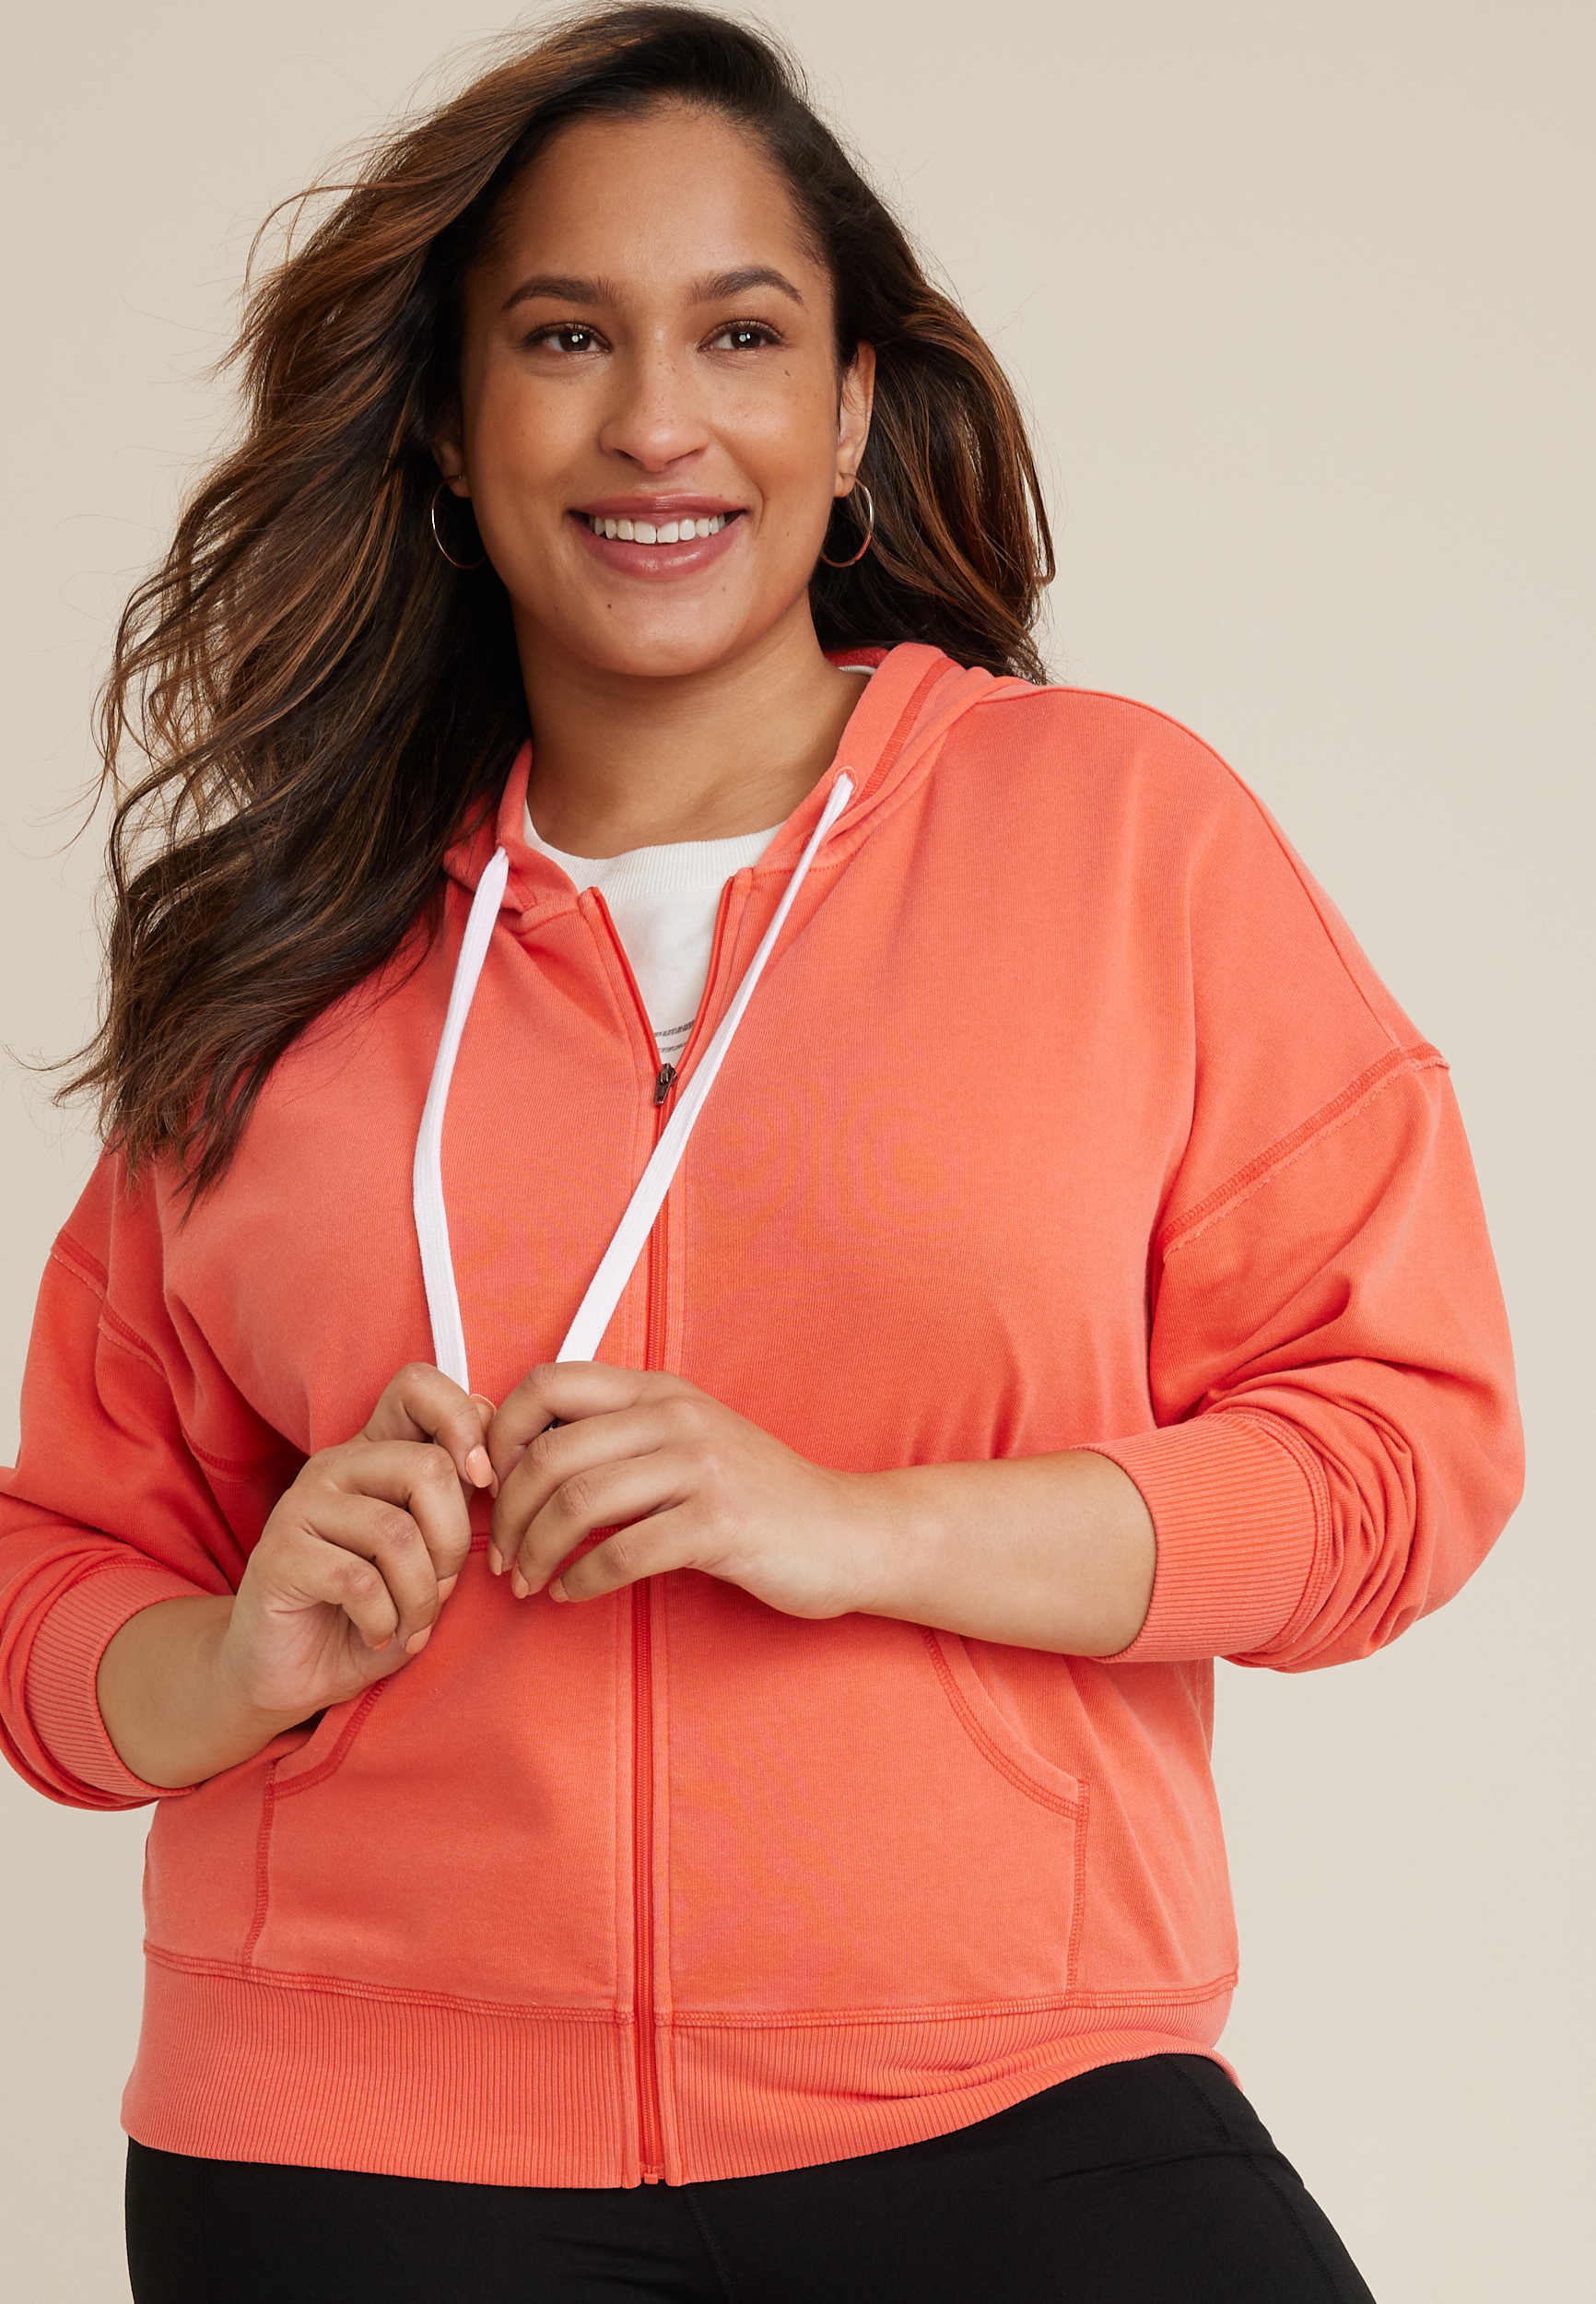 boat clearance clothes: Women's Plus Size Clothing